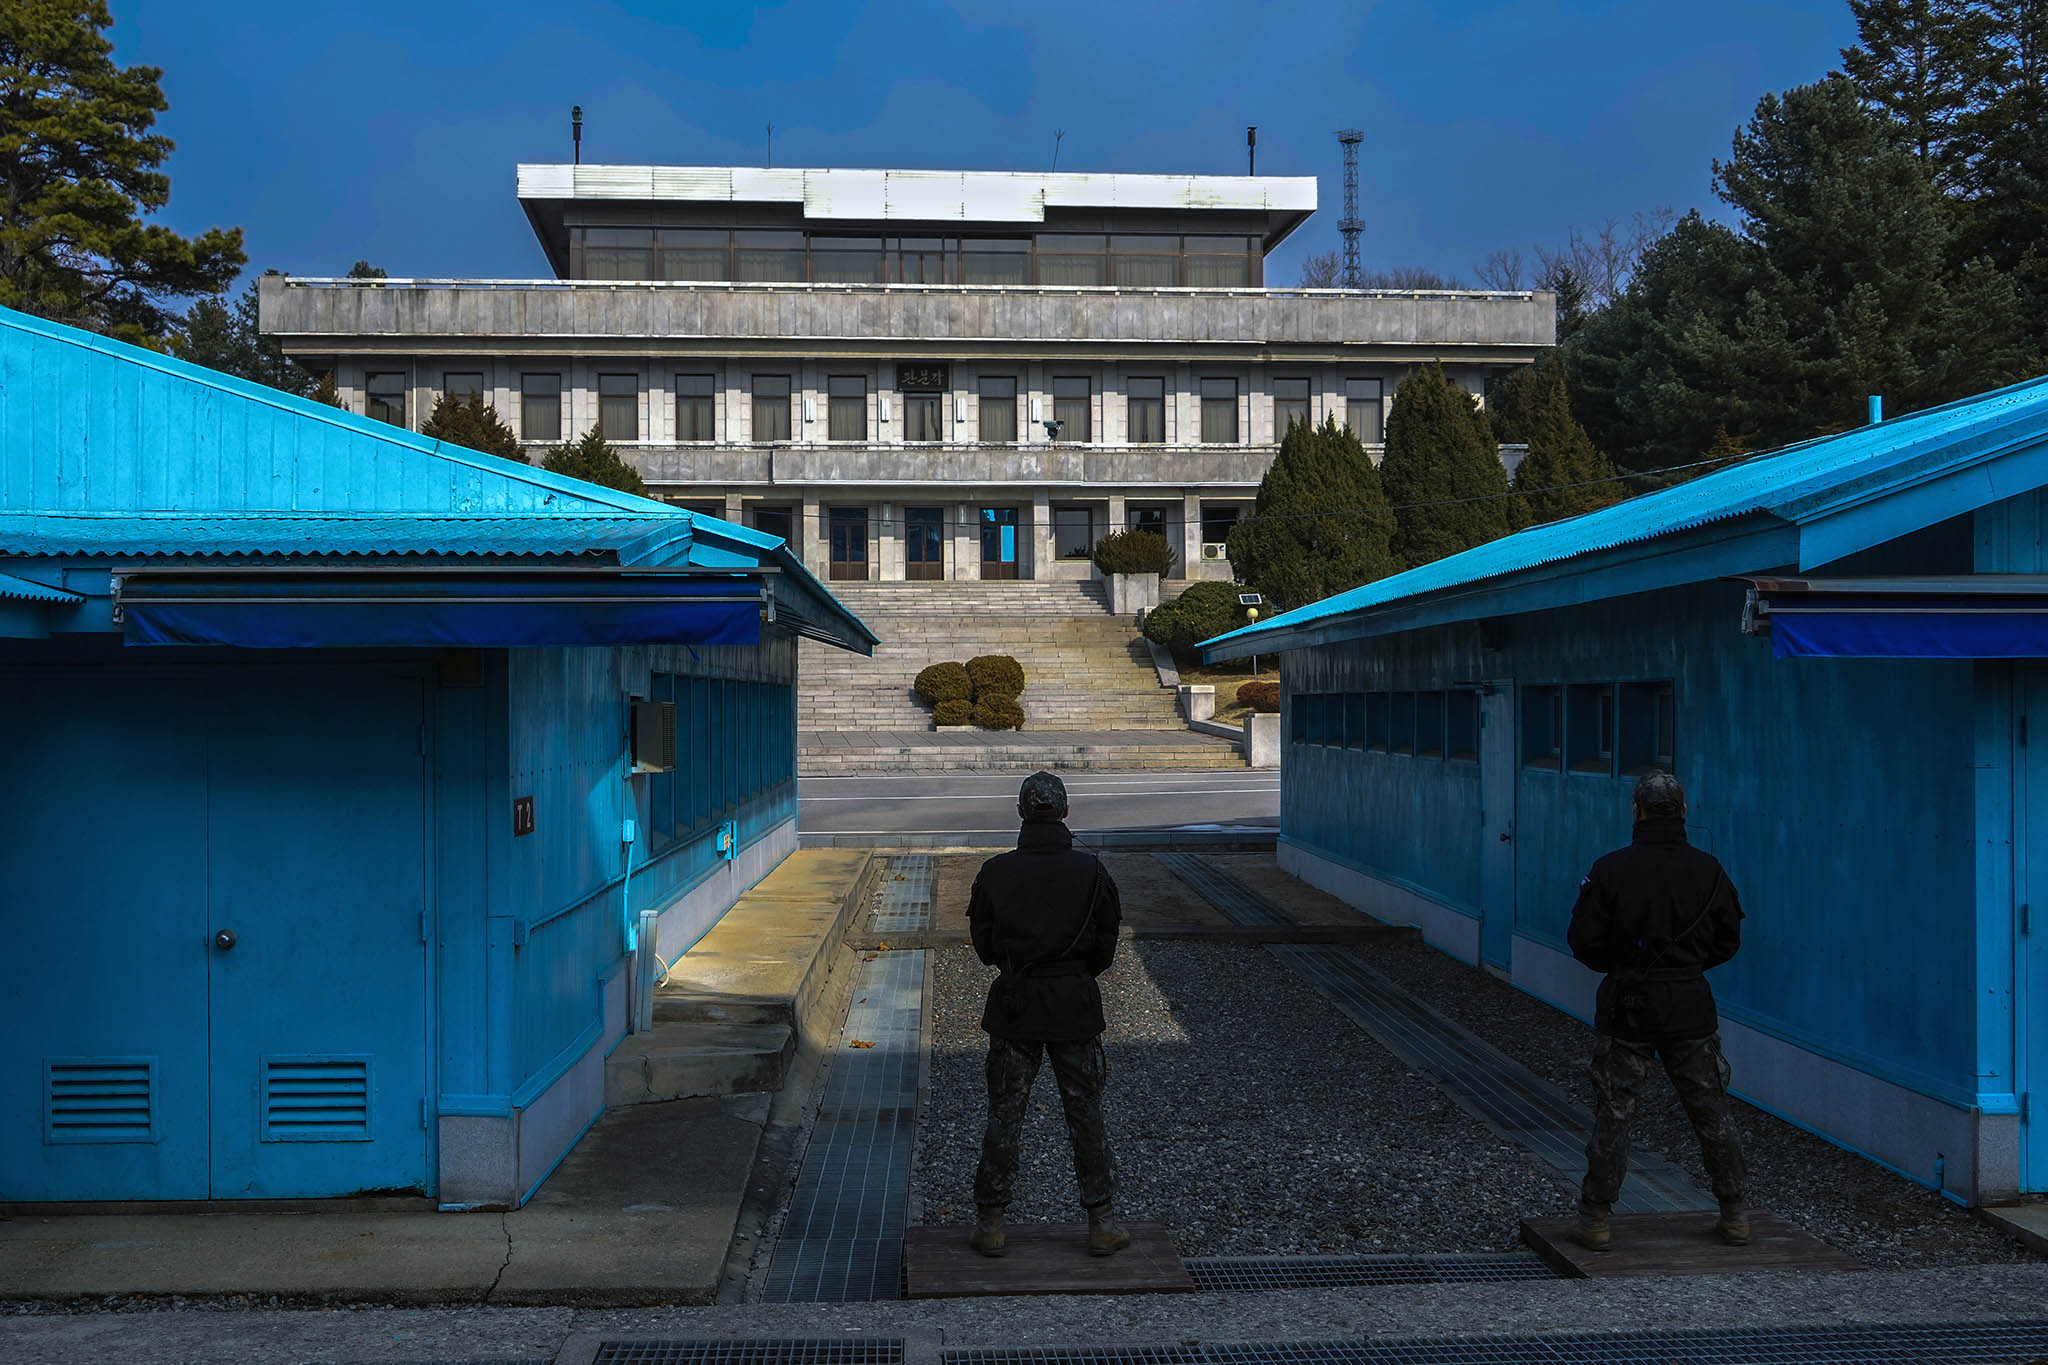 South Korean soldiers stand facing North Korea at the Joint Security Area at Panmunjom, in the Demilitarized Zone between North and South Korea. February 7, 2023. (Chang W. Lee/The New York Times)